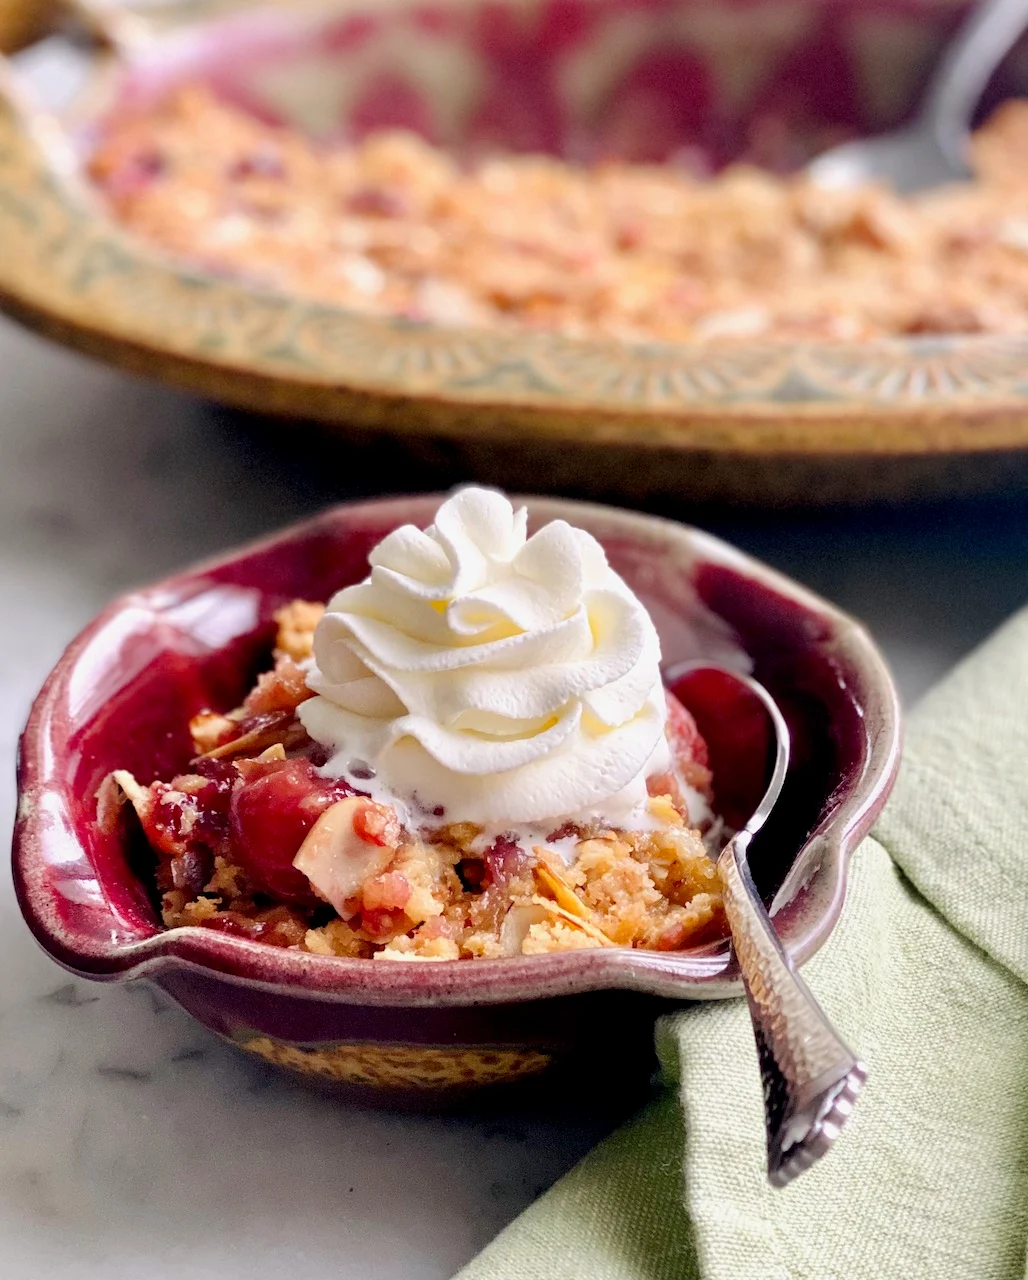 This is a photo of Cherry Almond Cobbler served in a red bowl with a spoon topped with a scoop of vanilla ice cream. Behind the bowl is the cobbler in a pie plate.